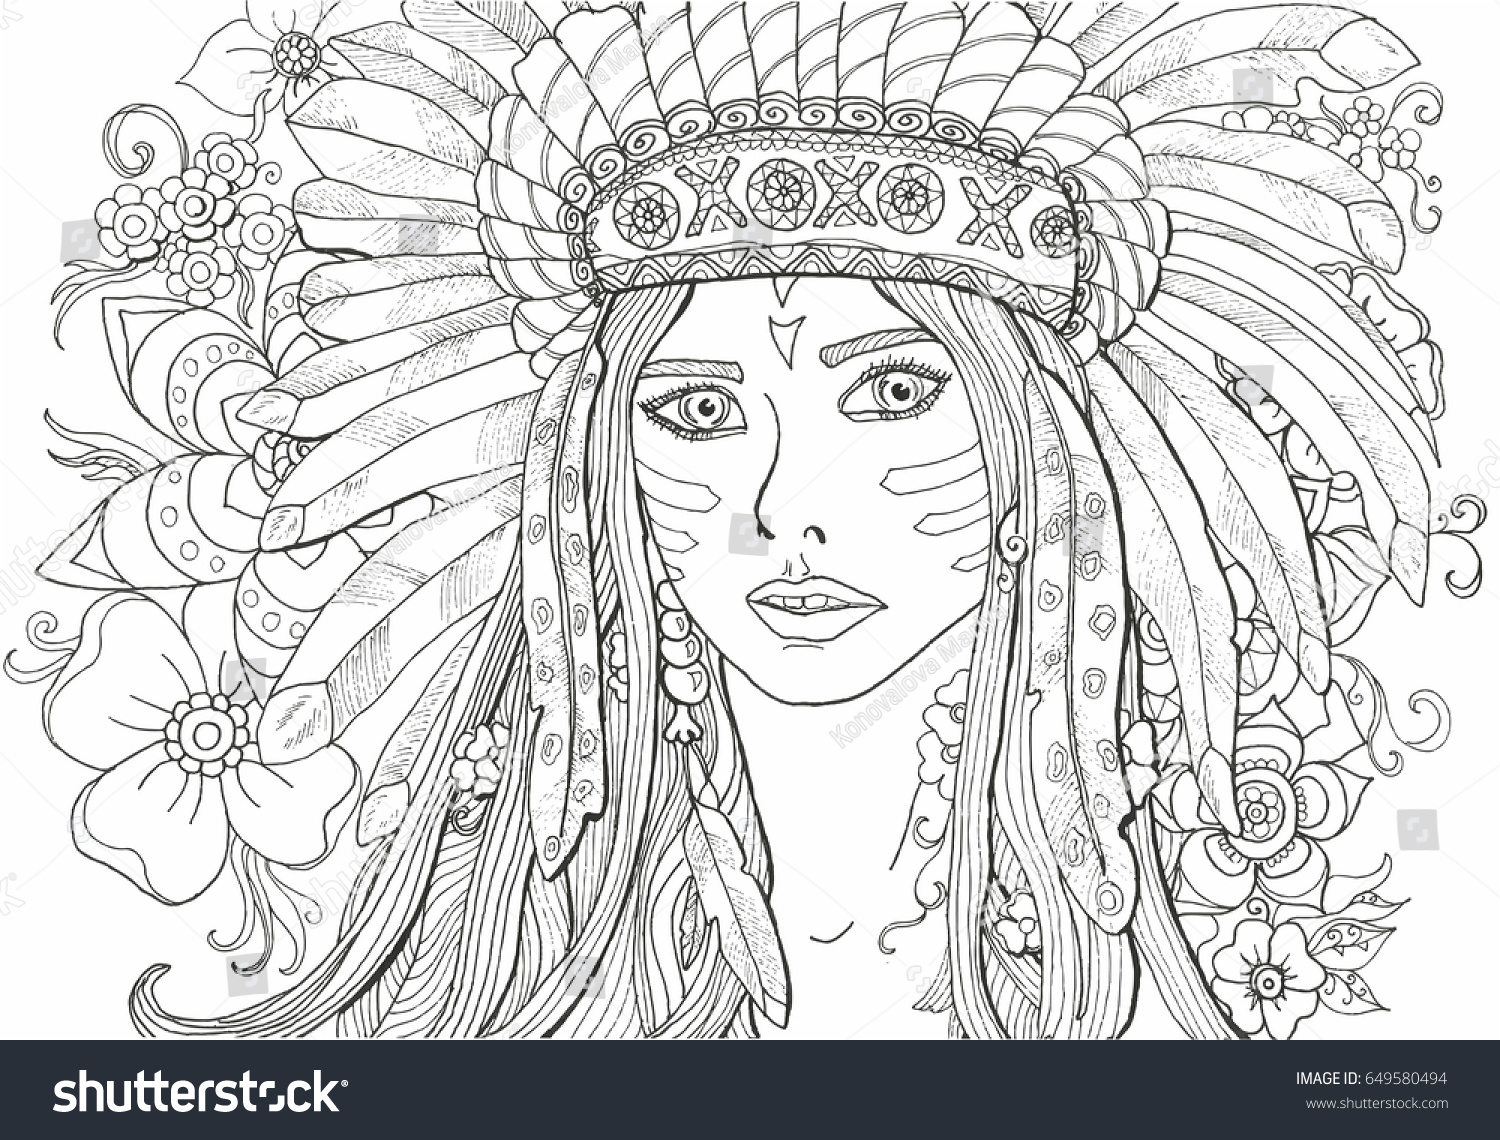 Coloring pages for adults girl Indian with decoration of feathers